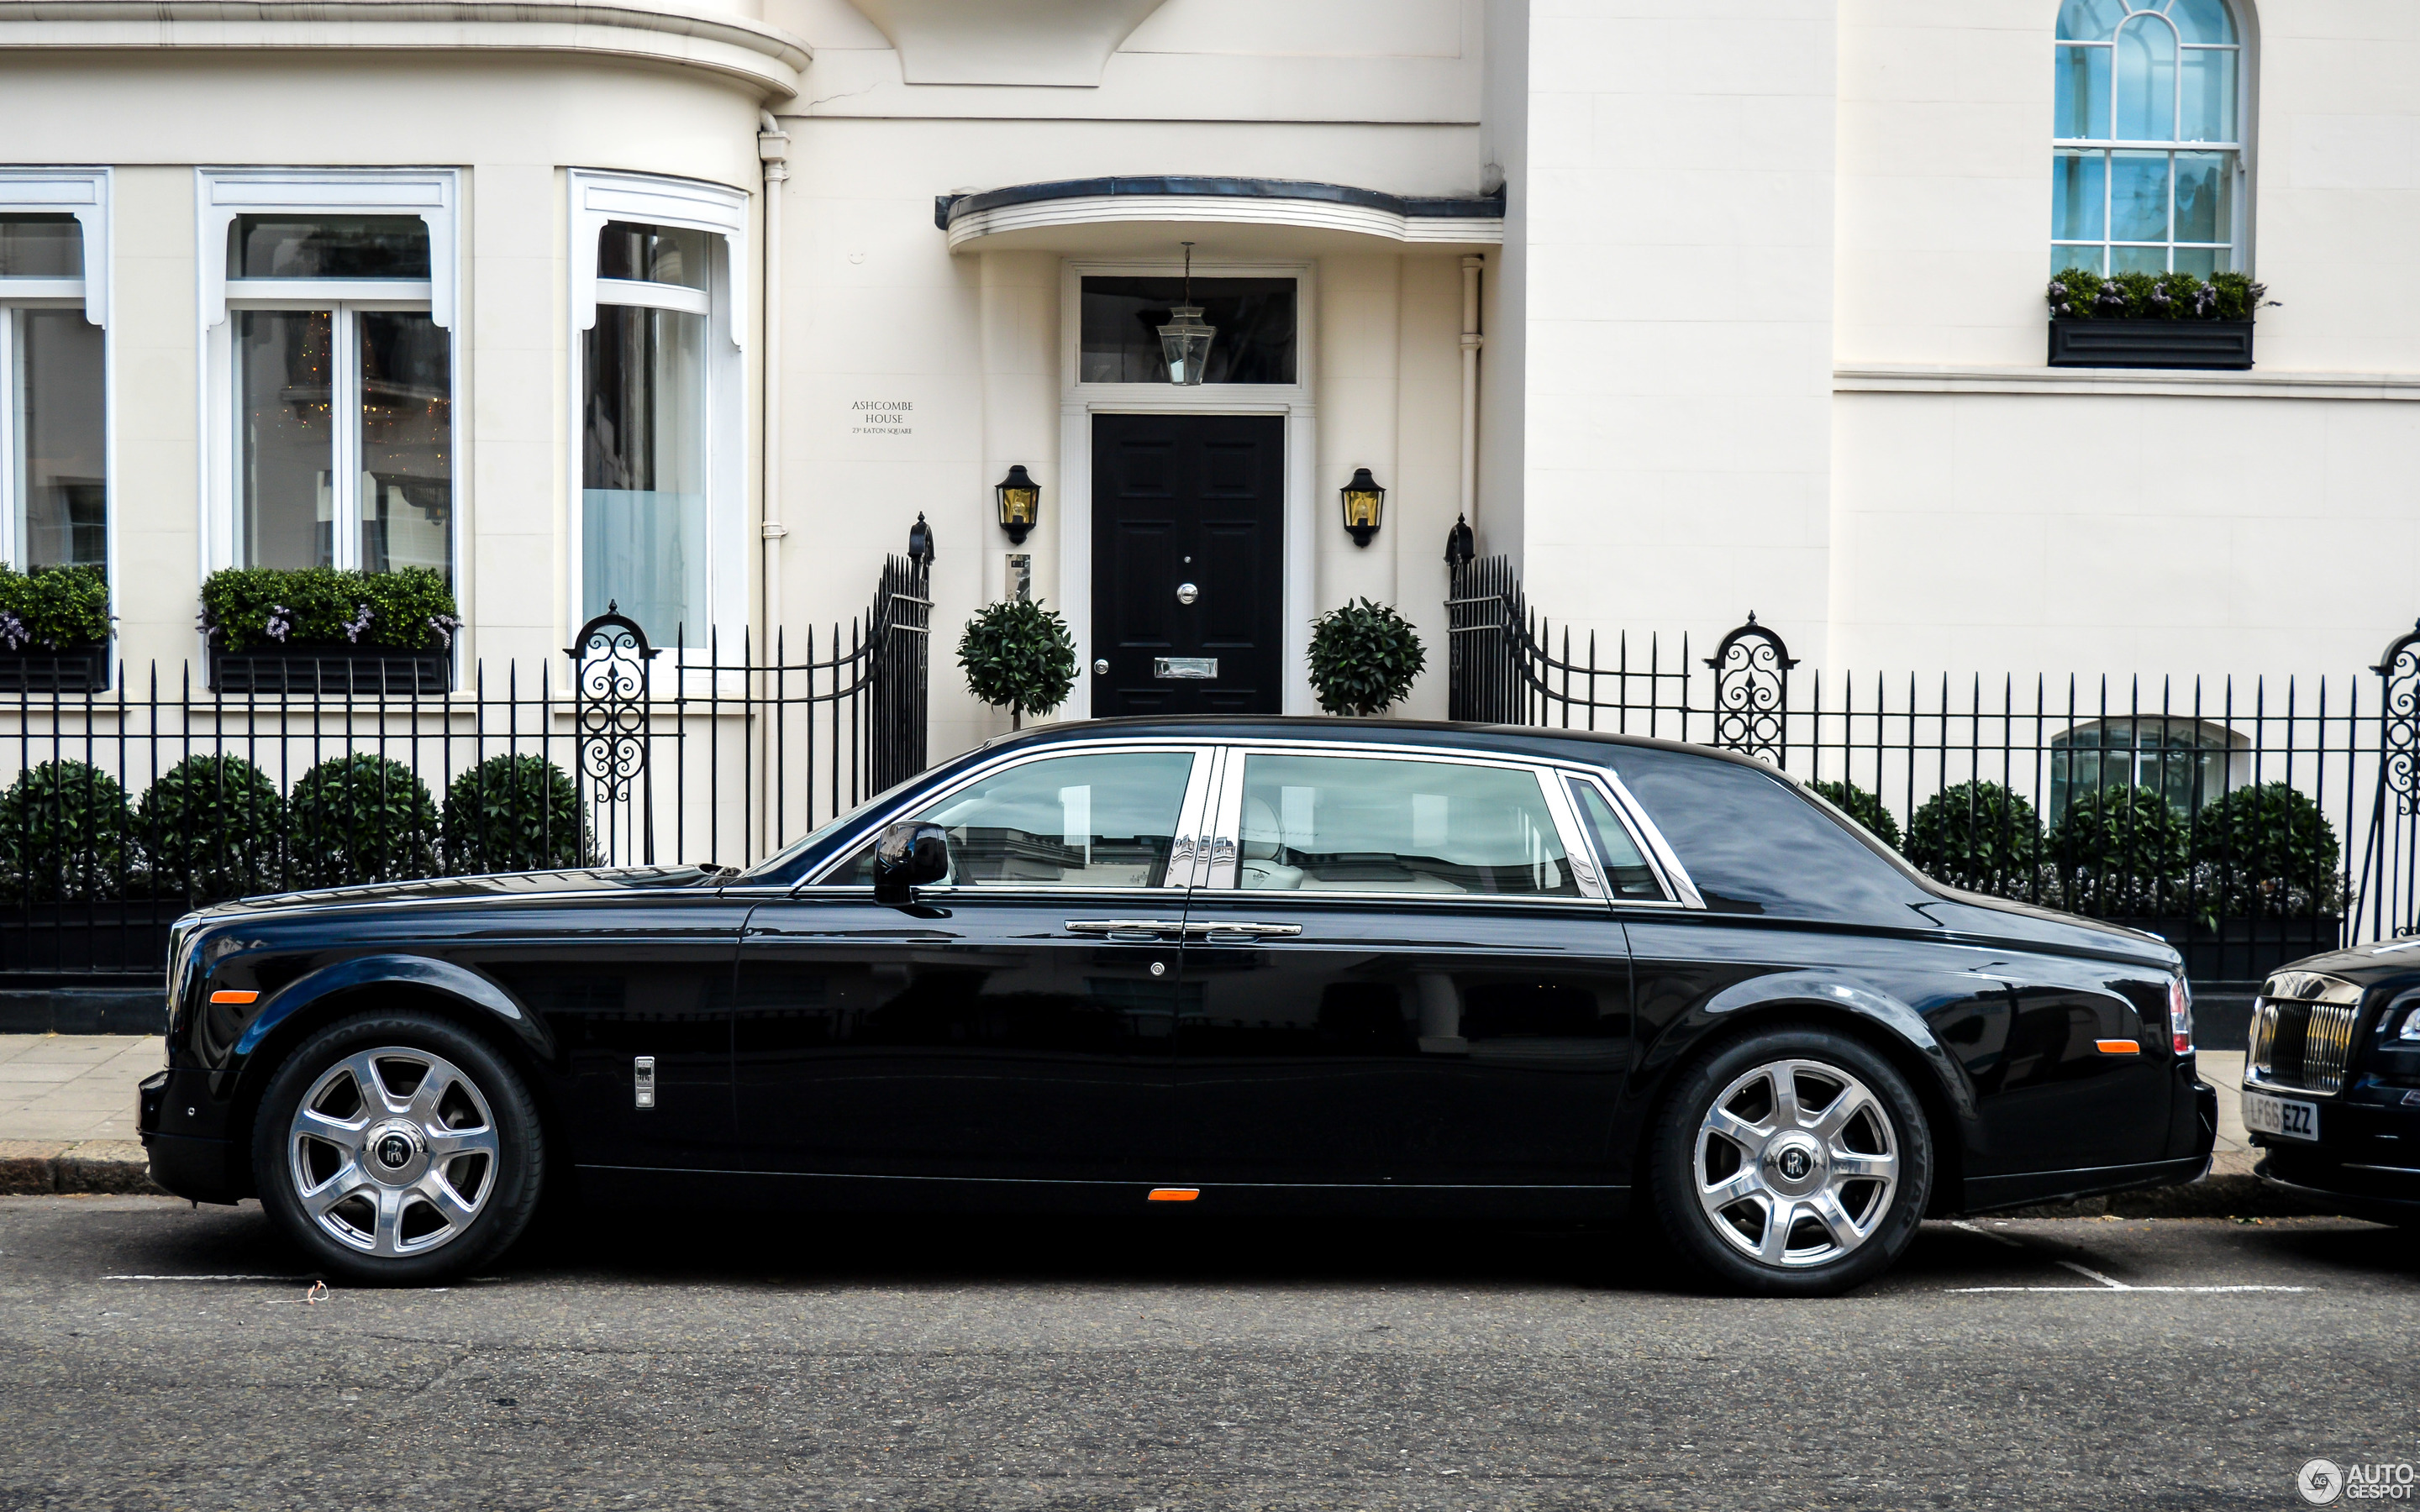 Car Rolls Royce Luxury Cars British Cars Side View Building Watermarked Logo Vehicle 2880x1800